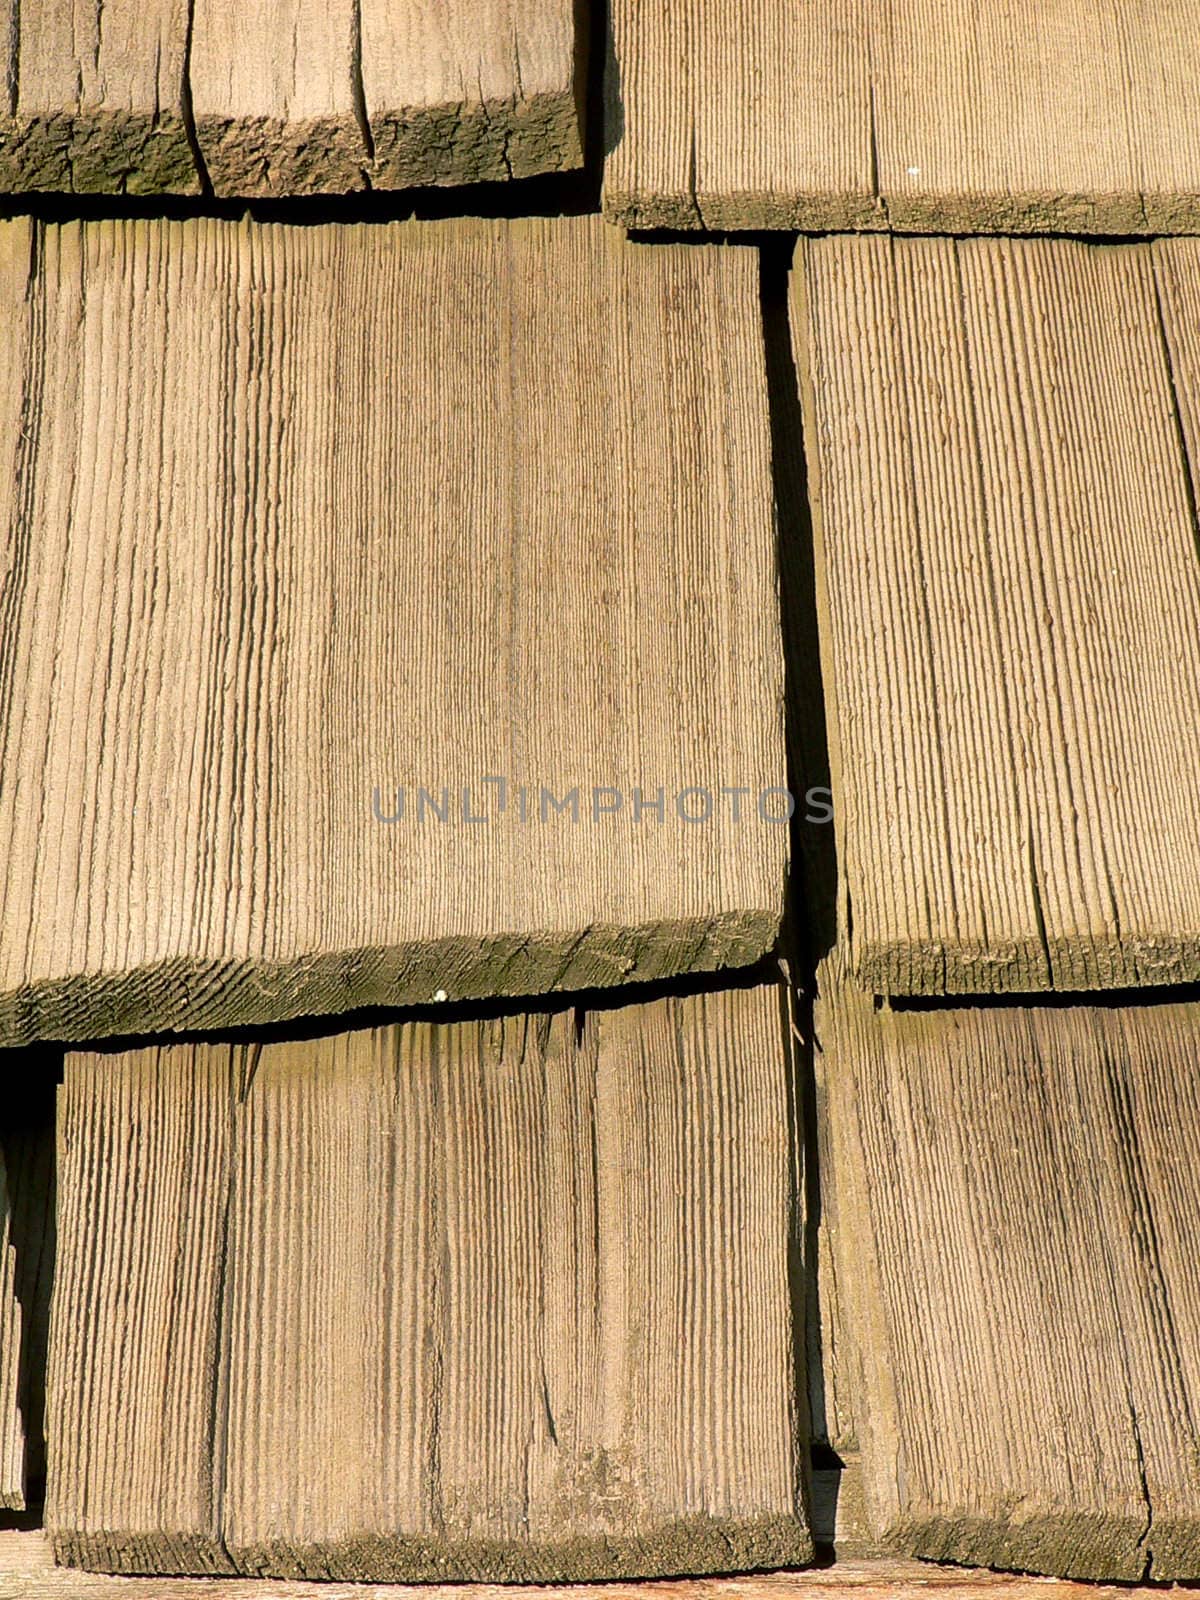 Wooden Shingles by telecast